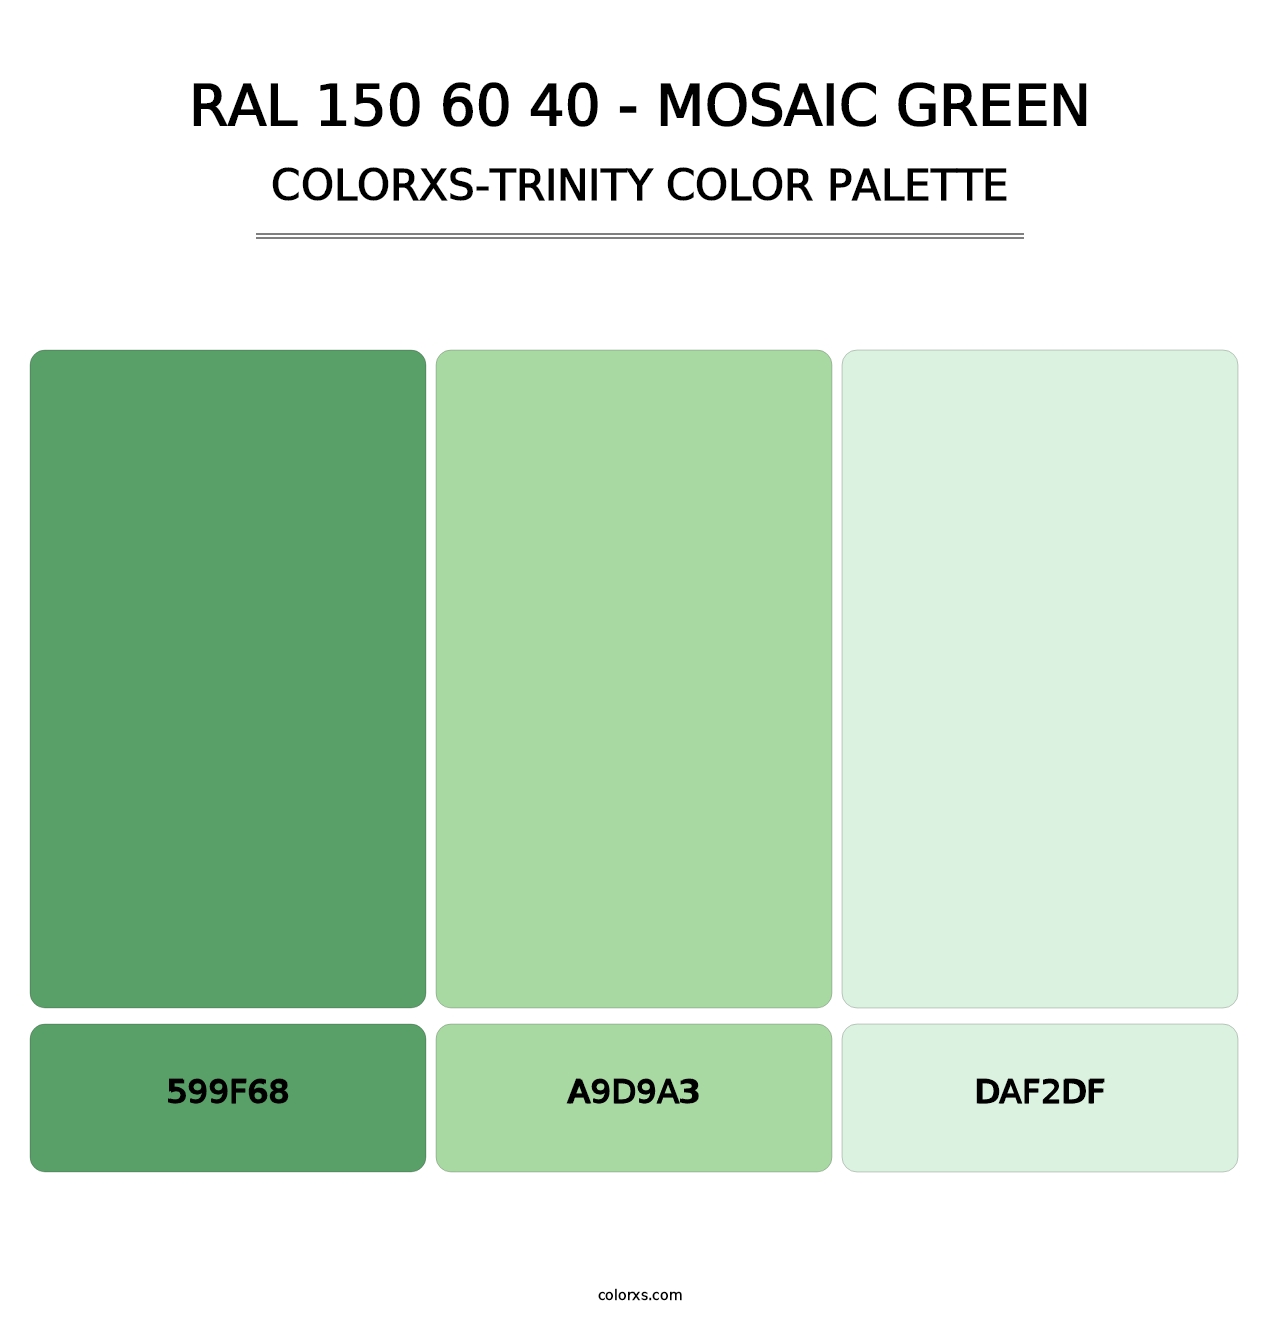 RAL 150 60 40 - Mosaic Green - Colorxs Trinity Palette